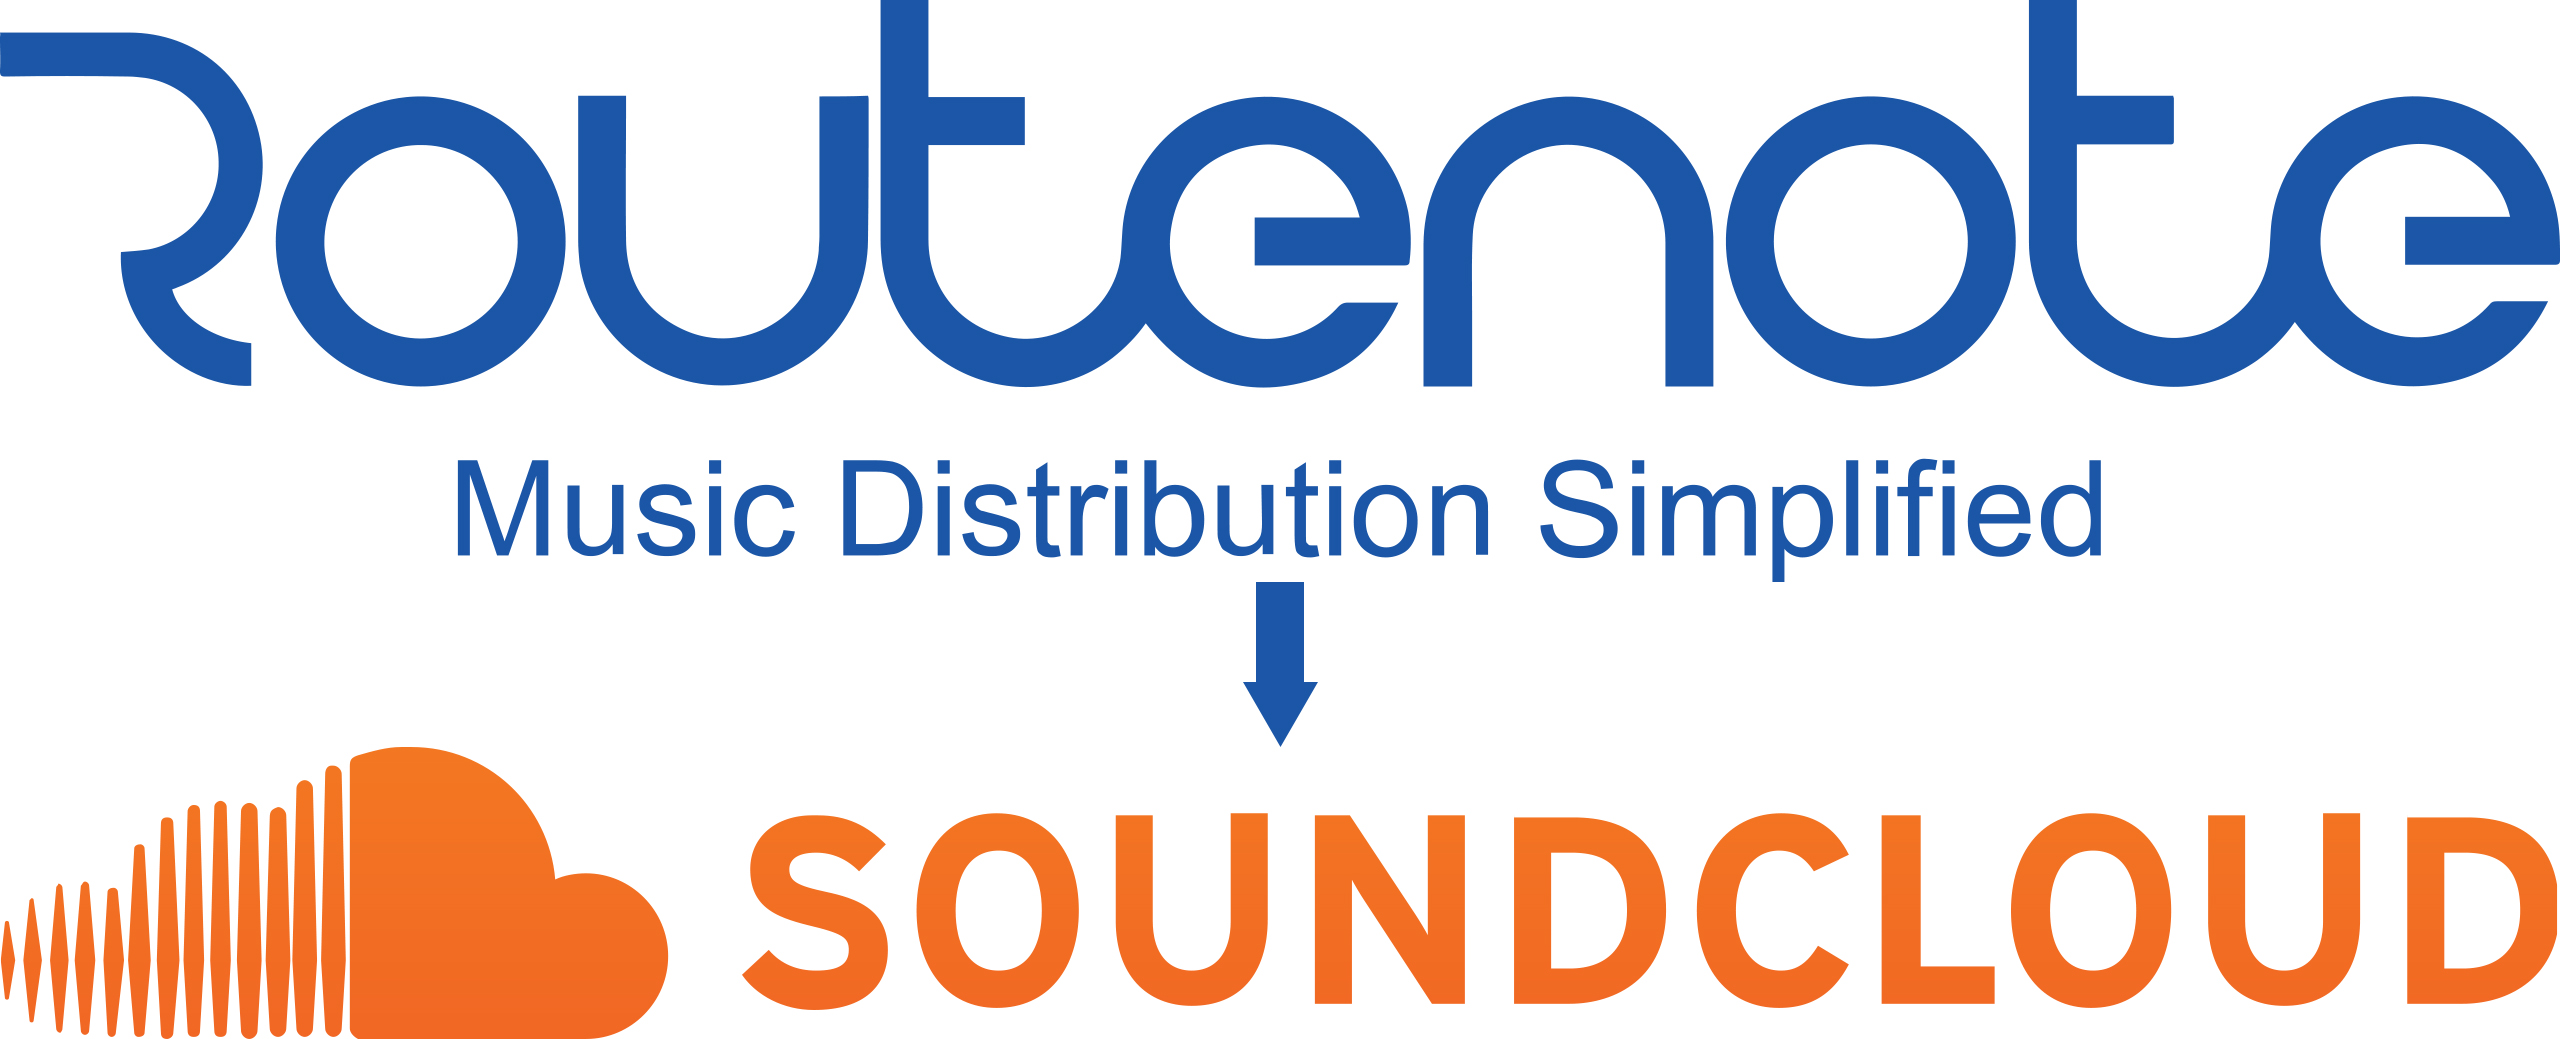 Why does DistroKid not distribute to SoundCloud?